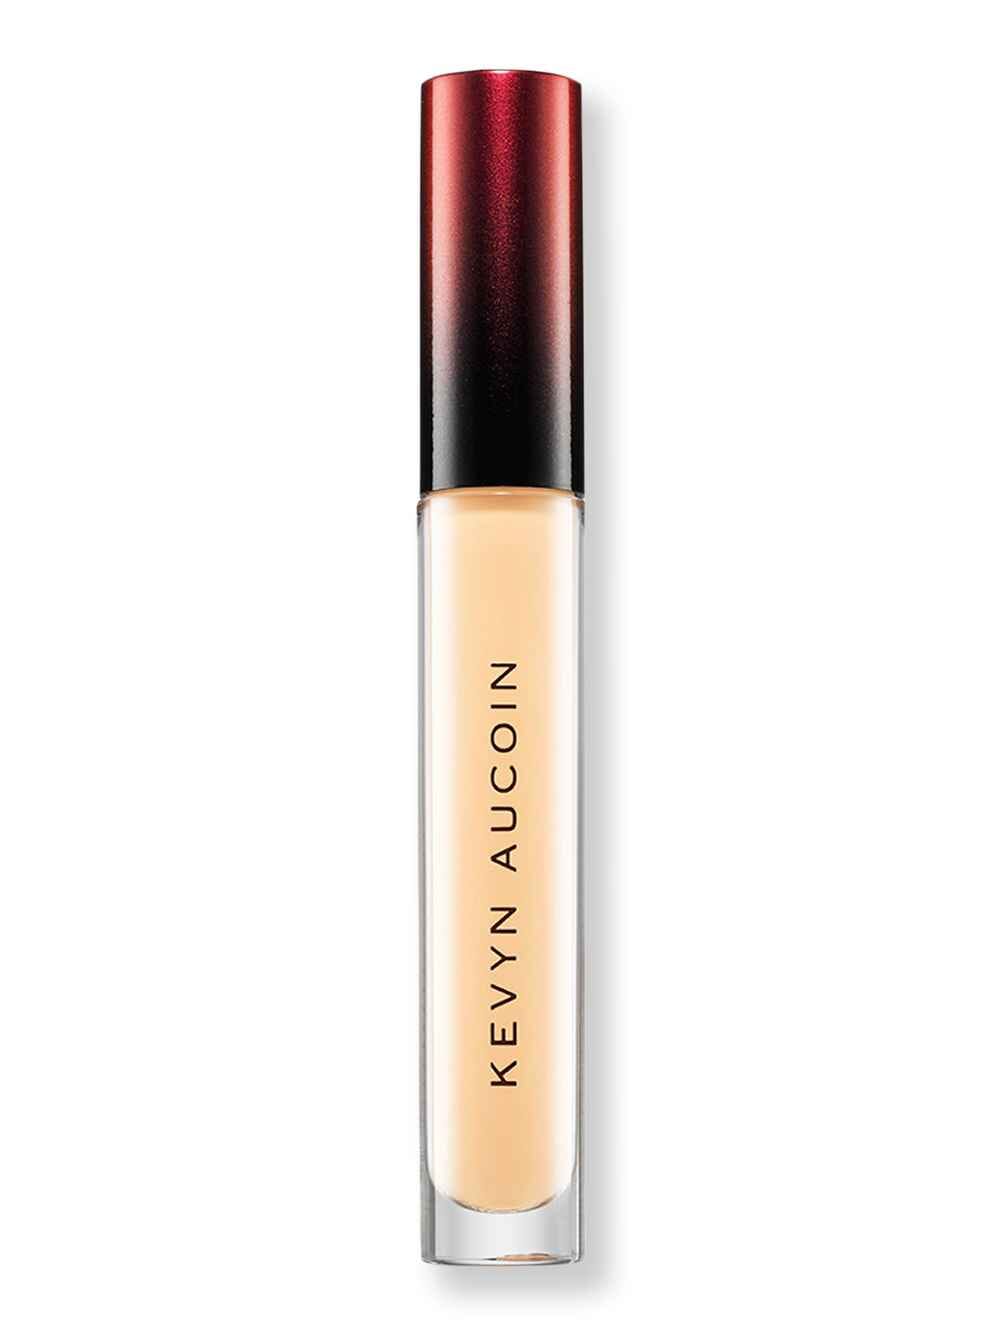 Kevyn Aucoin Kevyn Aucoin The Etherealist Super Natural Concealer Light EC 01 Face Concealers 